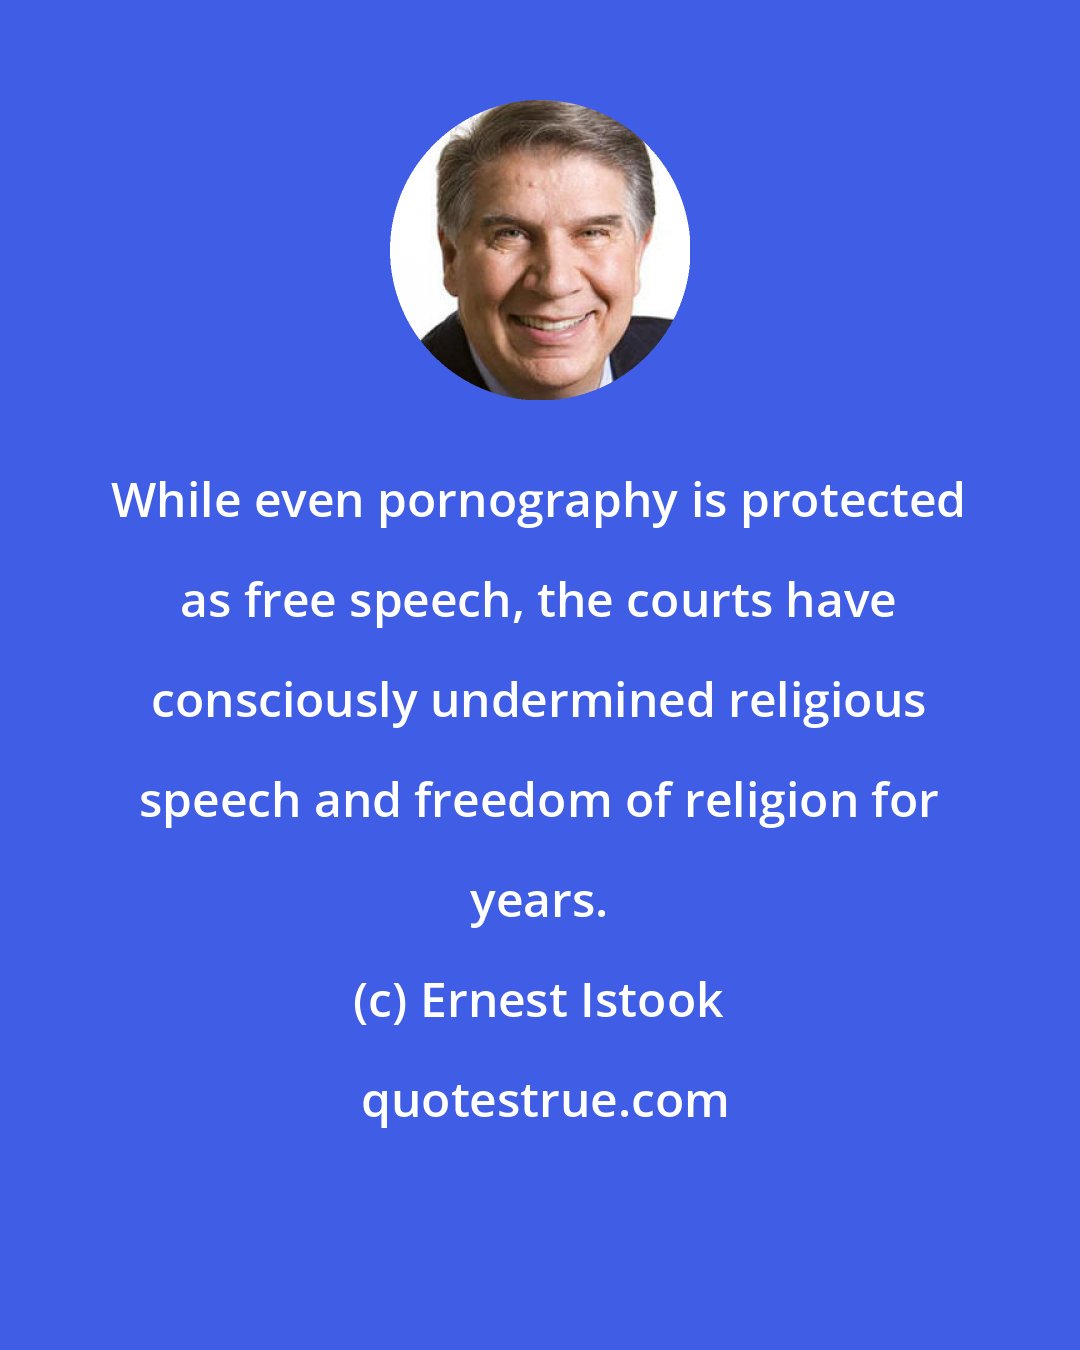 Ernest Istook: While even pornography is protected as free speech, the courts have consciously undermined religious speech and freedom of religion for years.